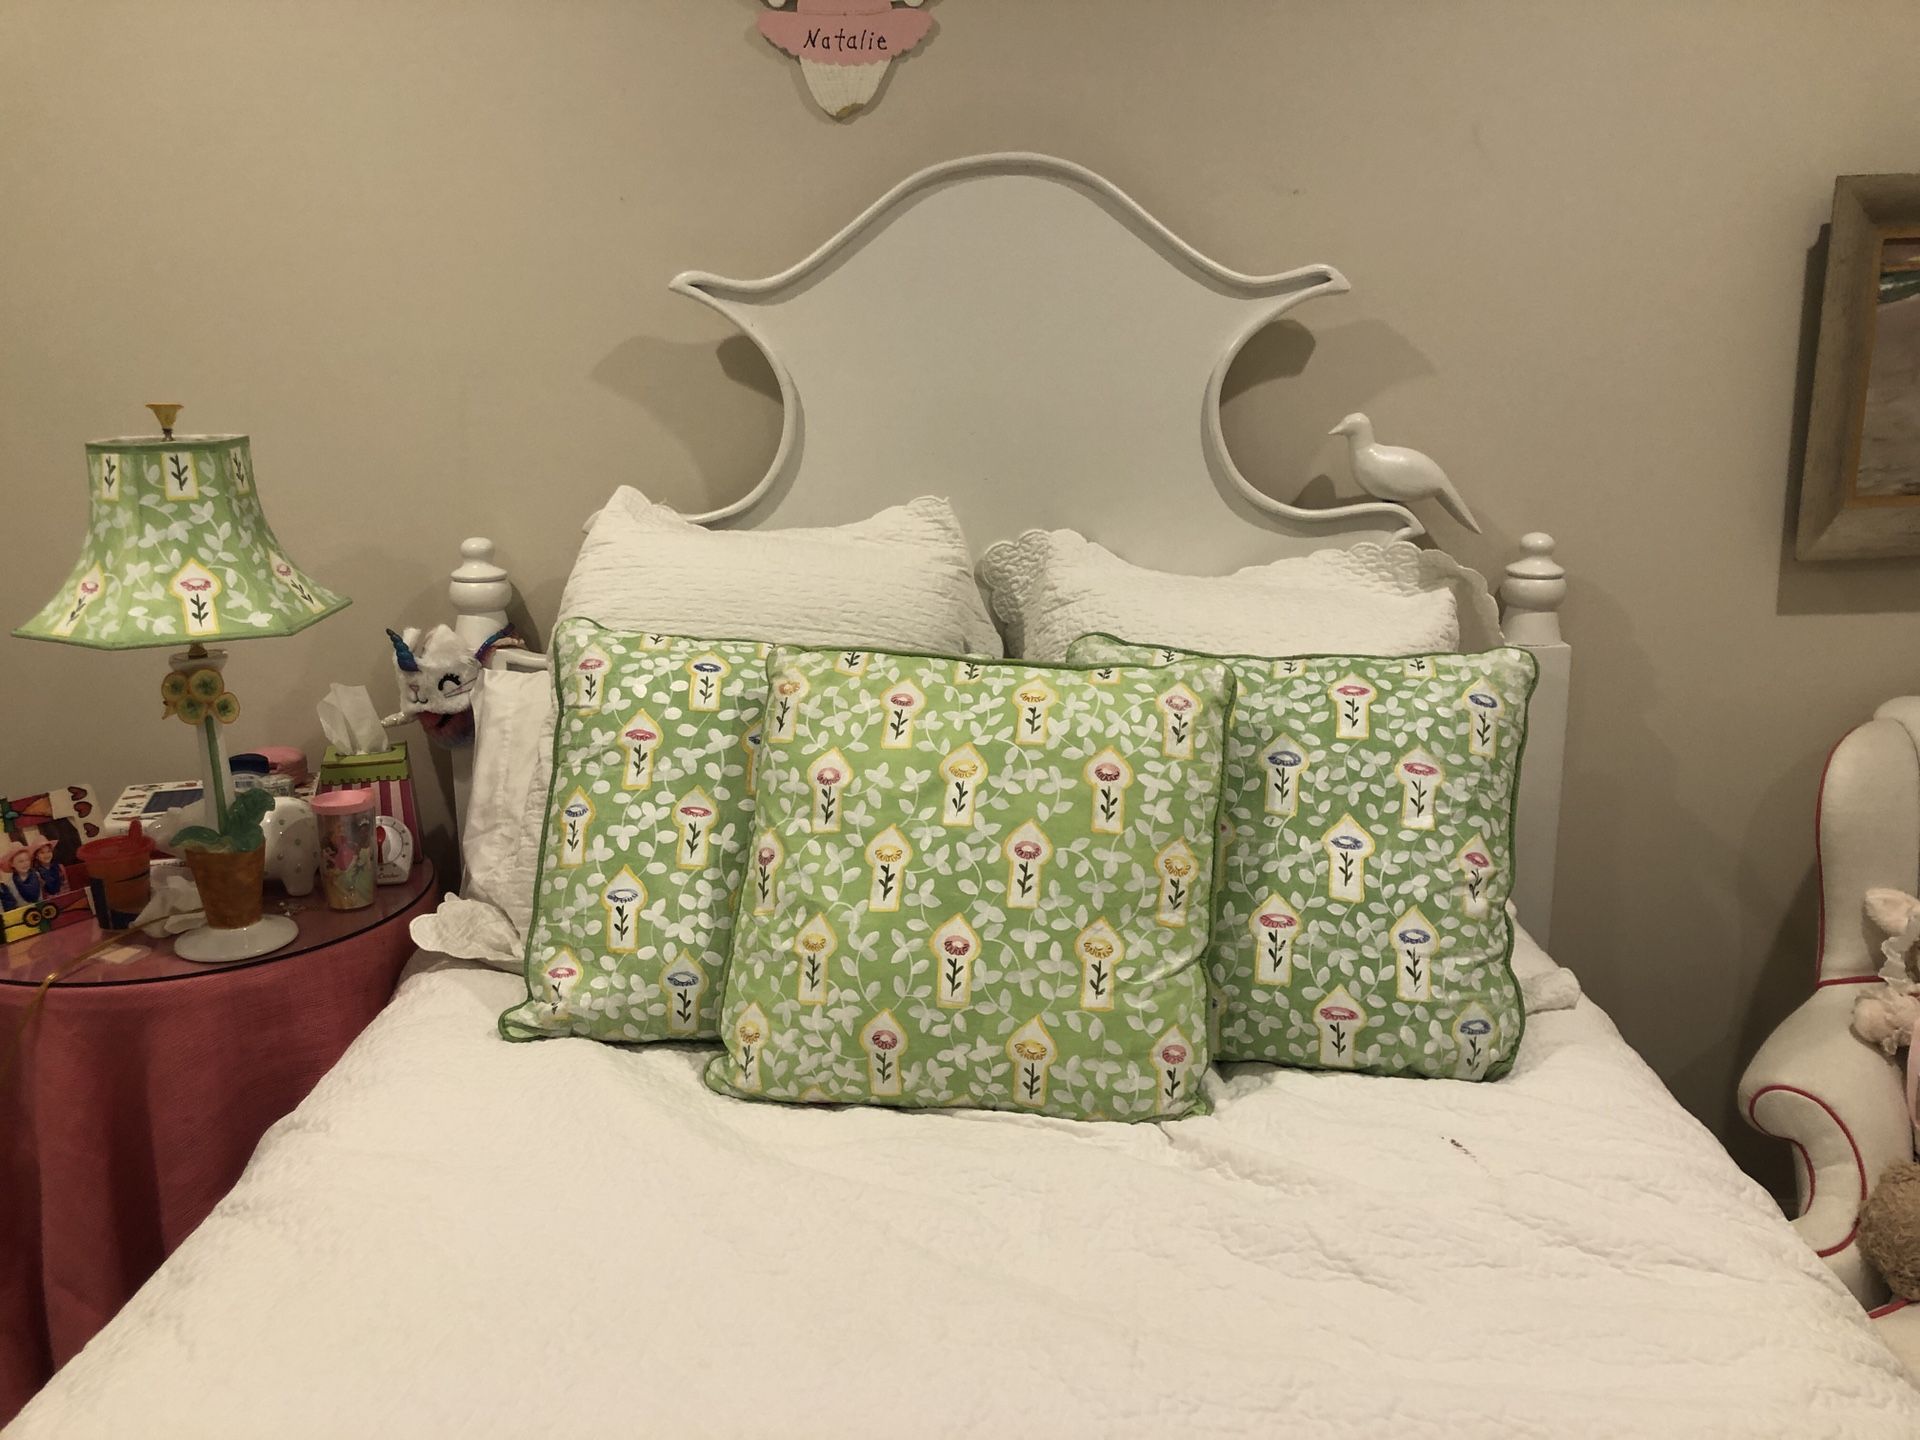 Decorative Painted Pillows with Matching Lamp